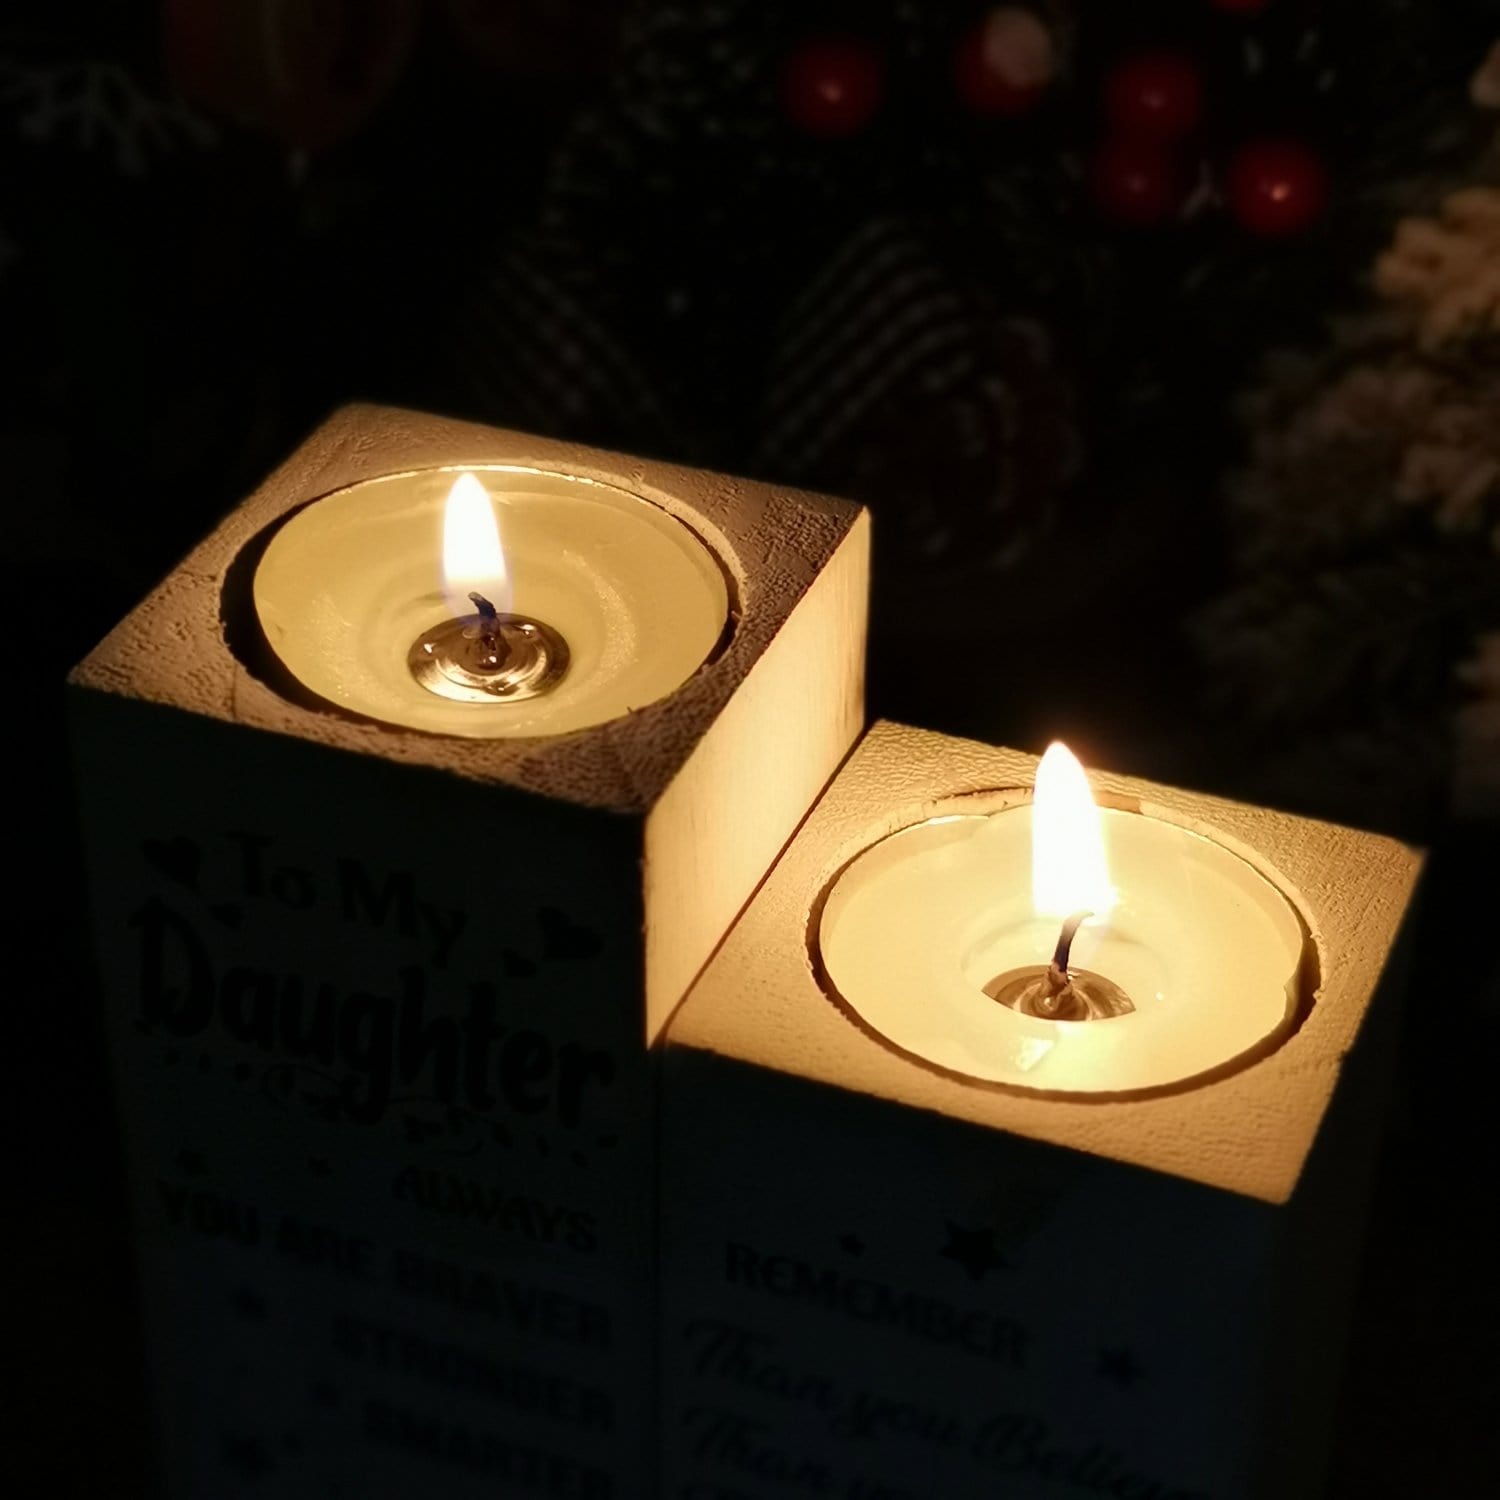 Candle Holders Grandpa To Granddaughter - You Are Loved More Wooden Candle Holders GiveMe-Gifts